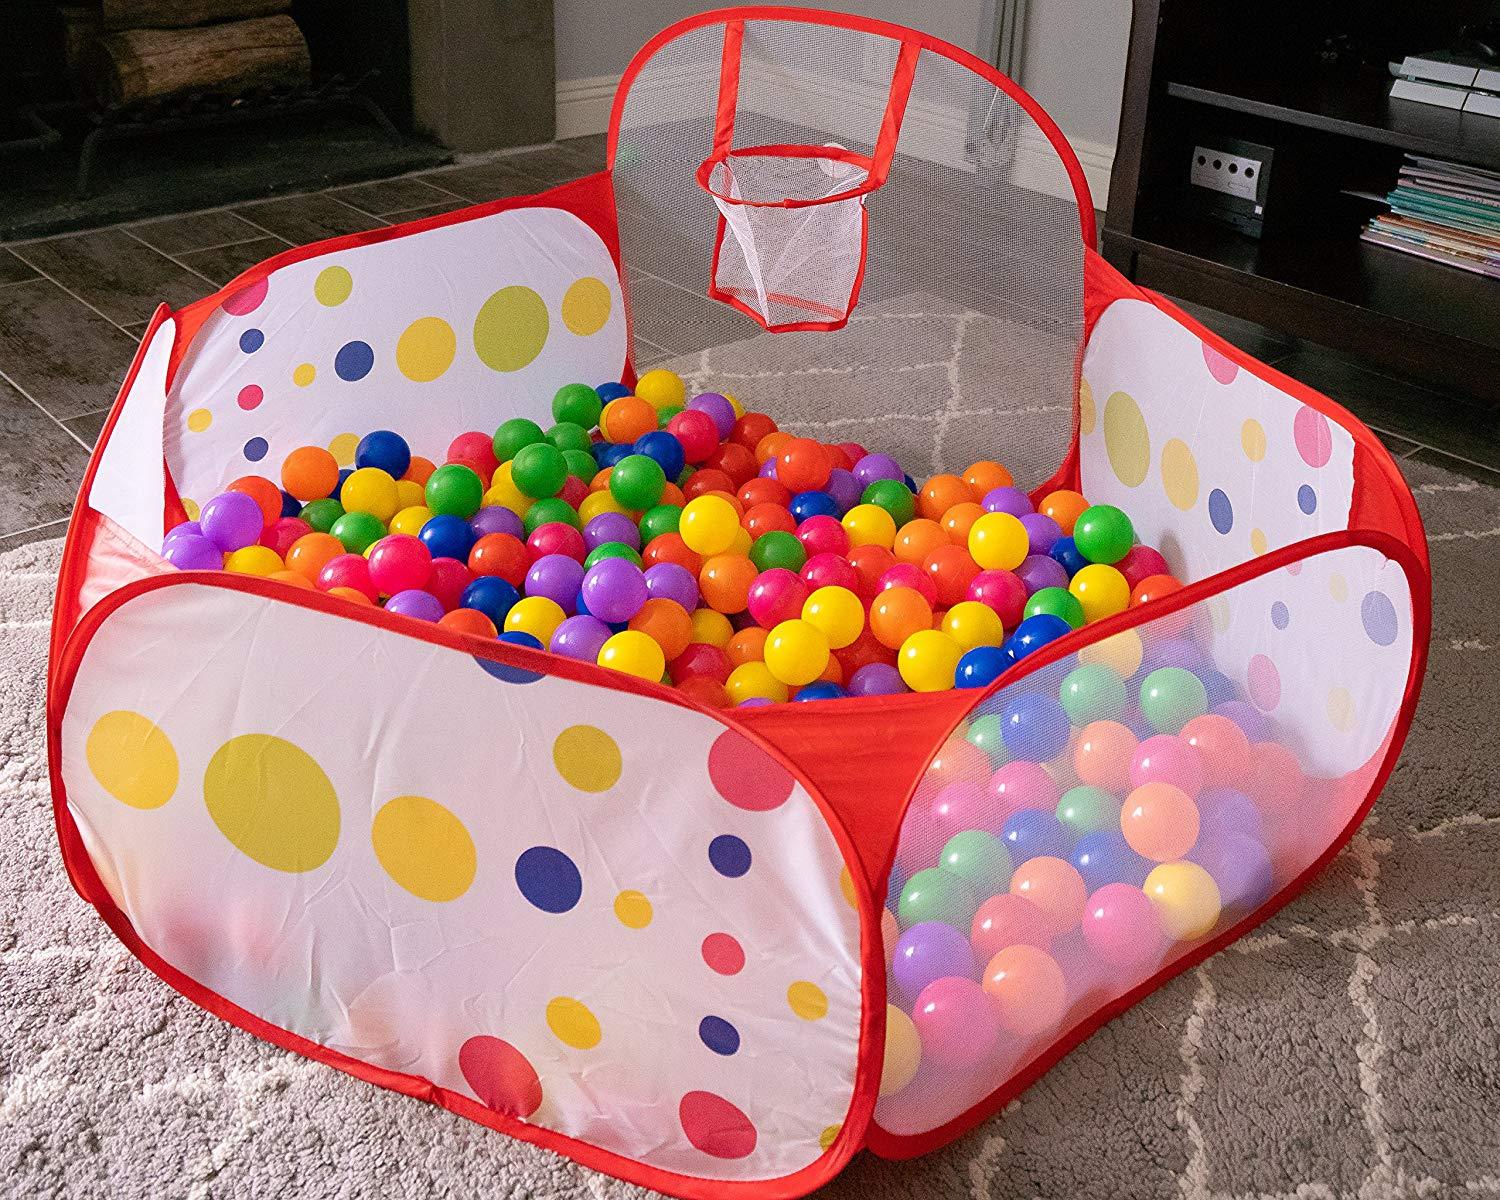 Foldable Ball Pit with Basketb...